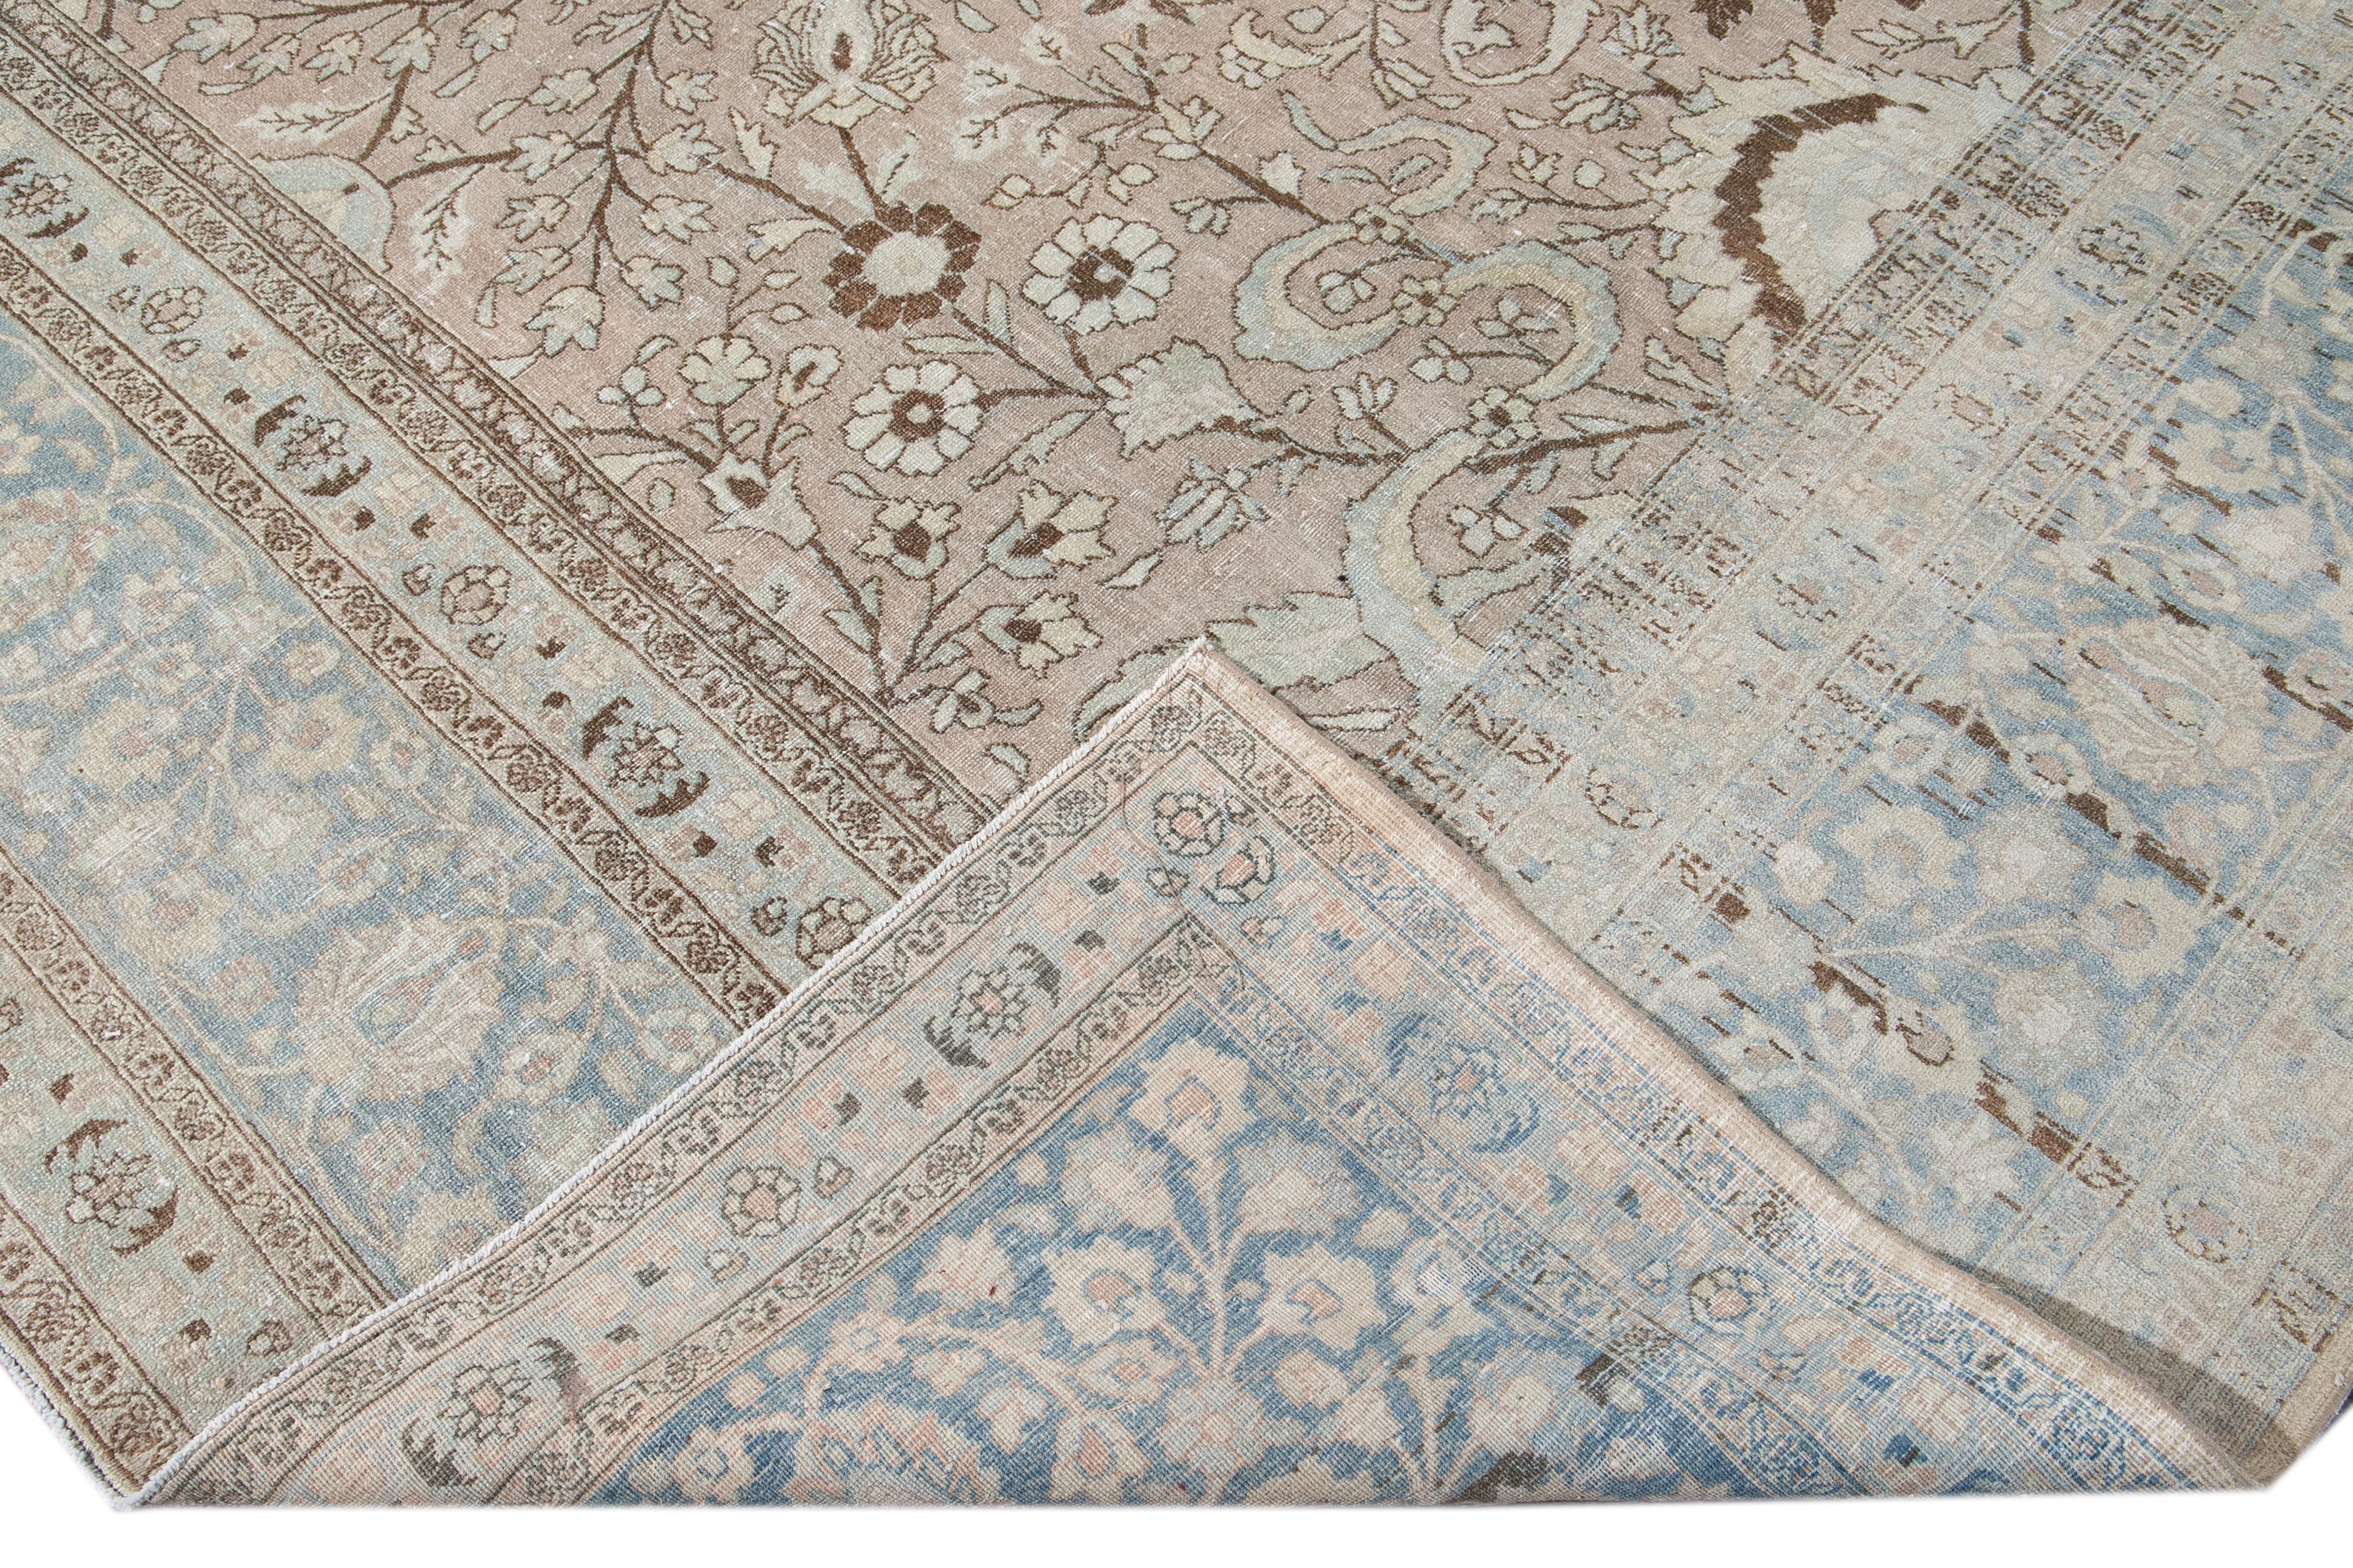 Beautiful antique Tabriz hand-knotted wool rug with a beige field. This rug has a blue frame and brown and ivory accents in a gorgeous all-over shabby chic floral design.

This rug measures: 10'9